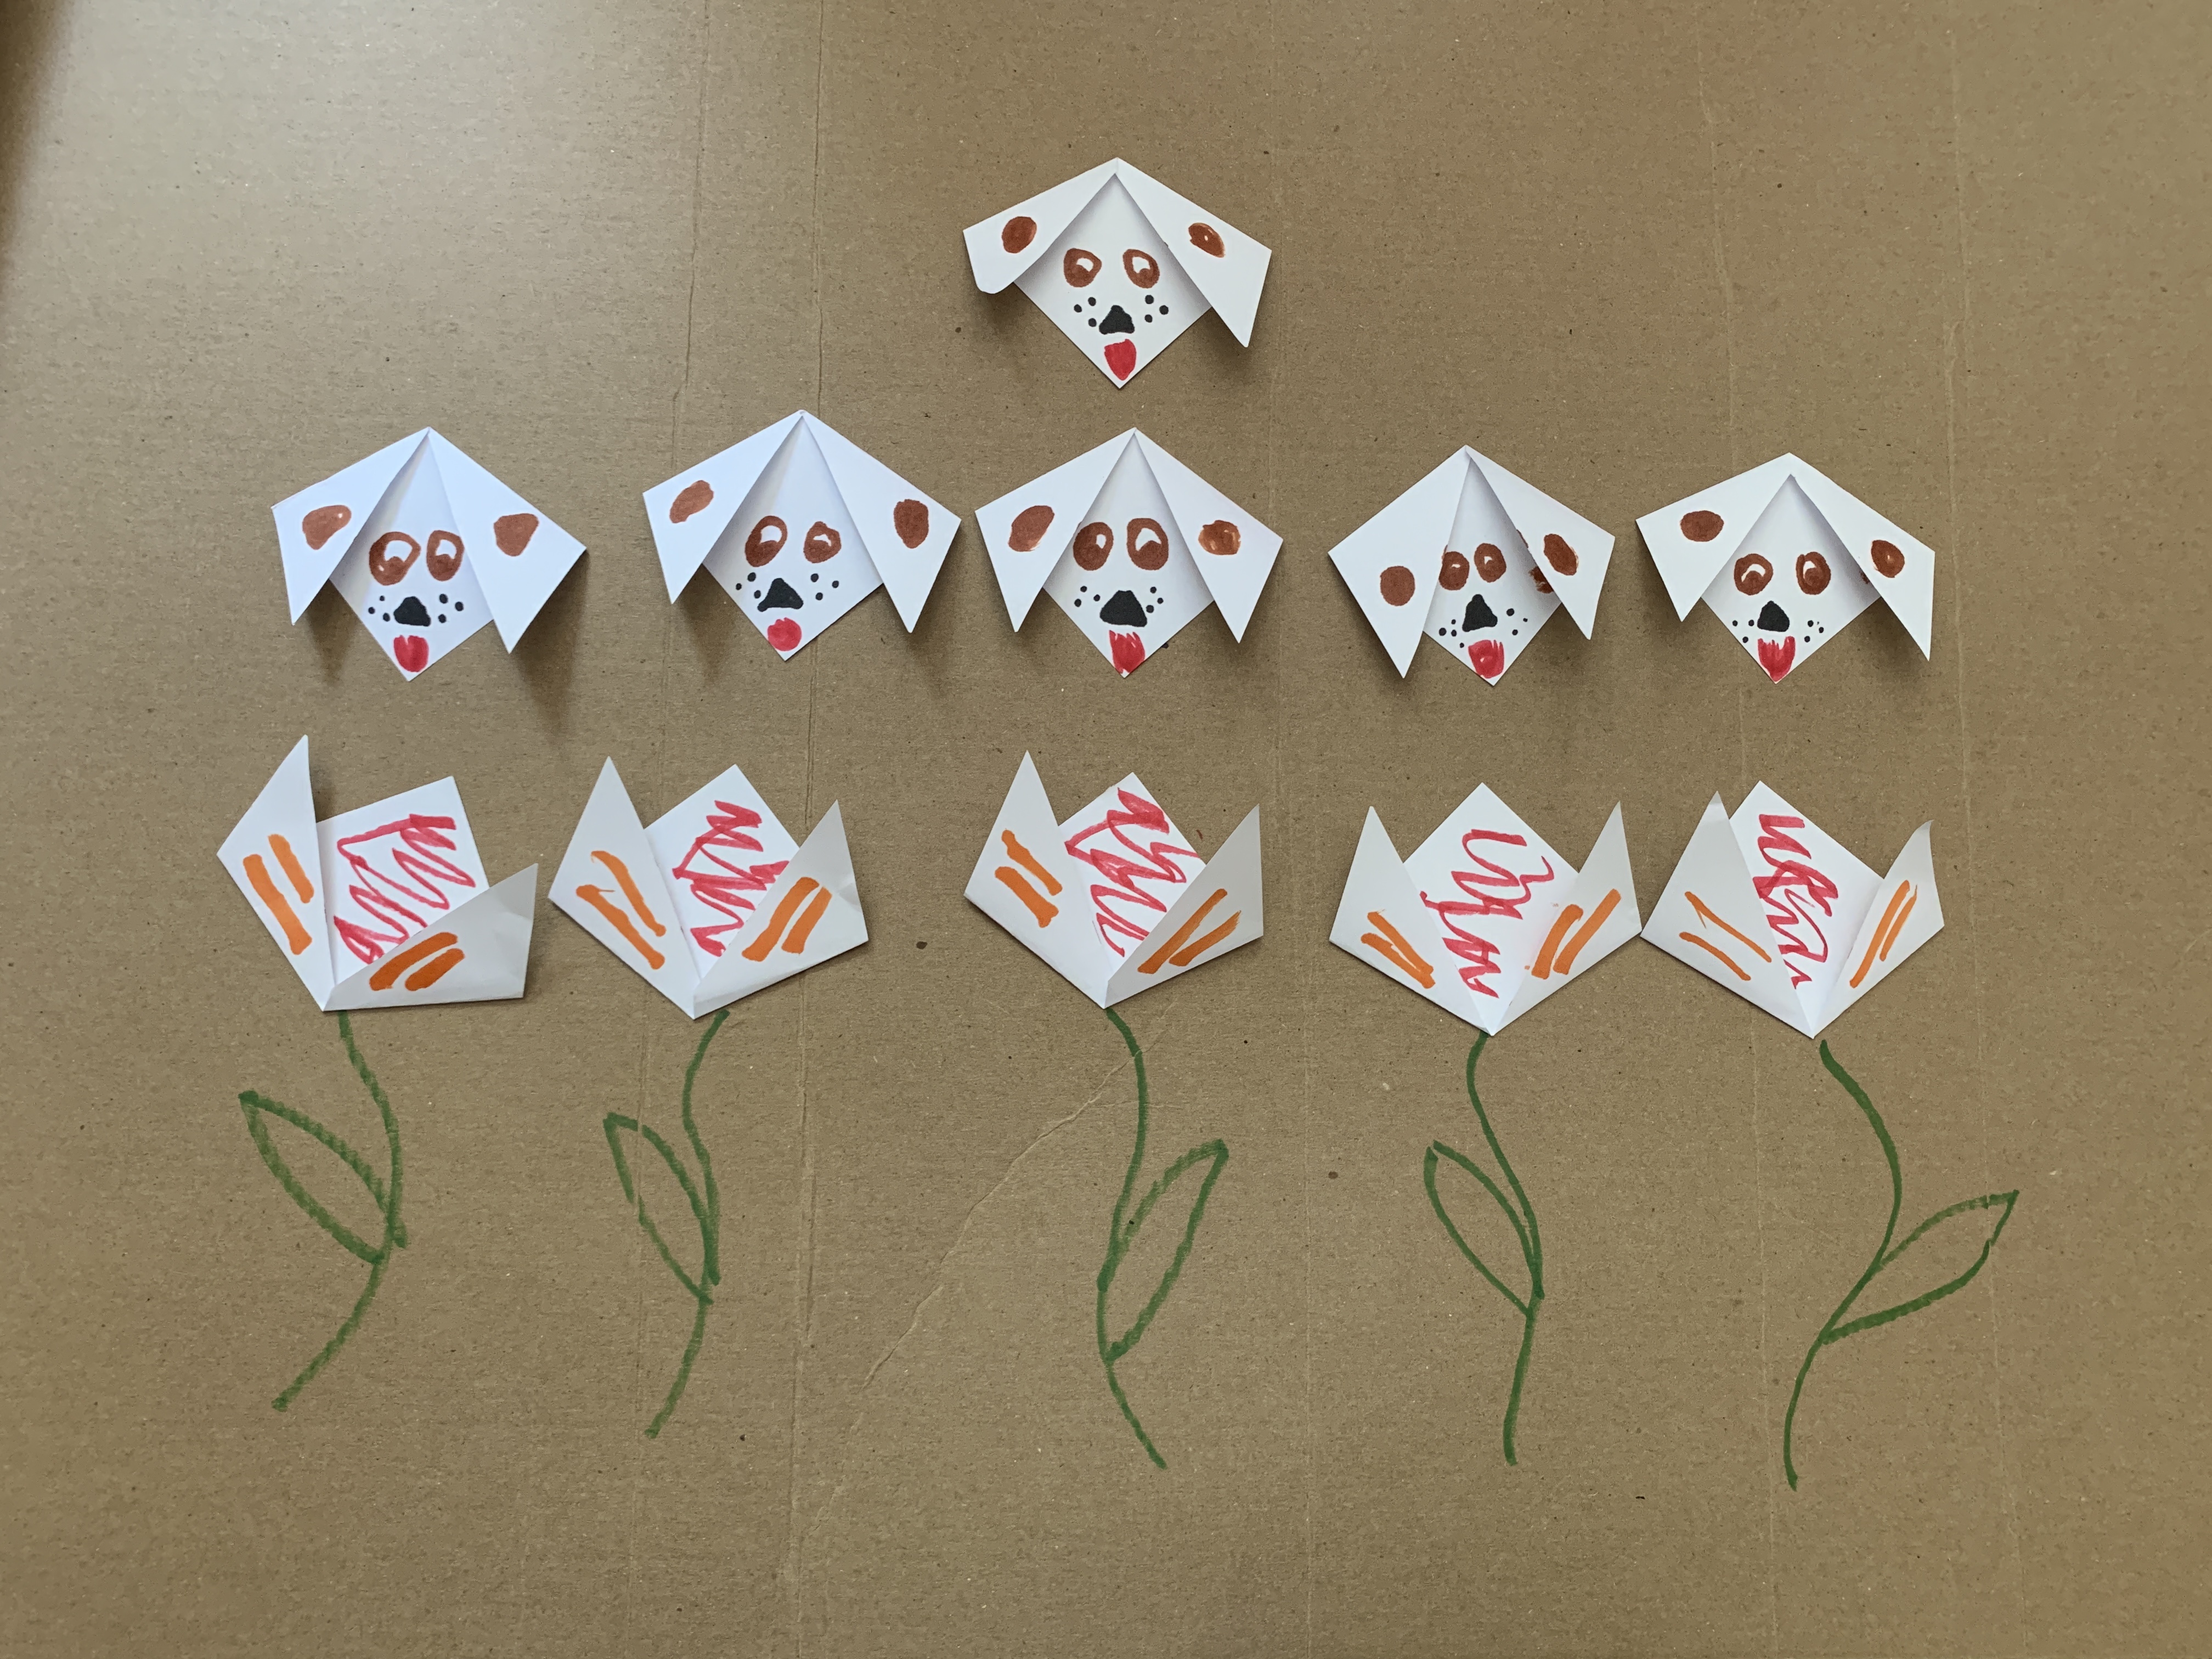 Small pieces of paper folded and decorated as puppies or tulips.